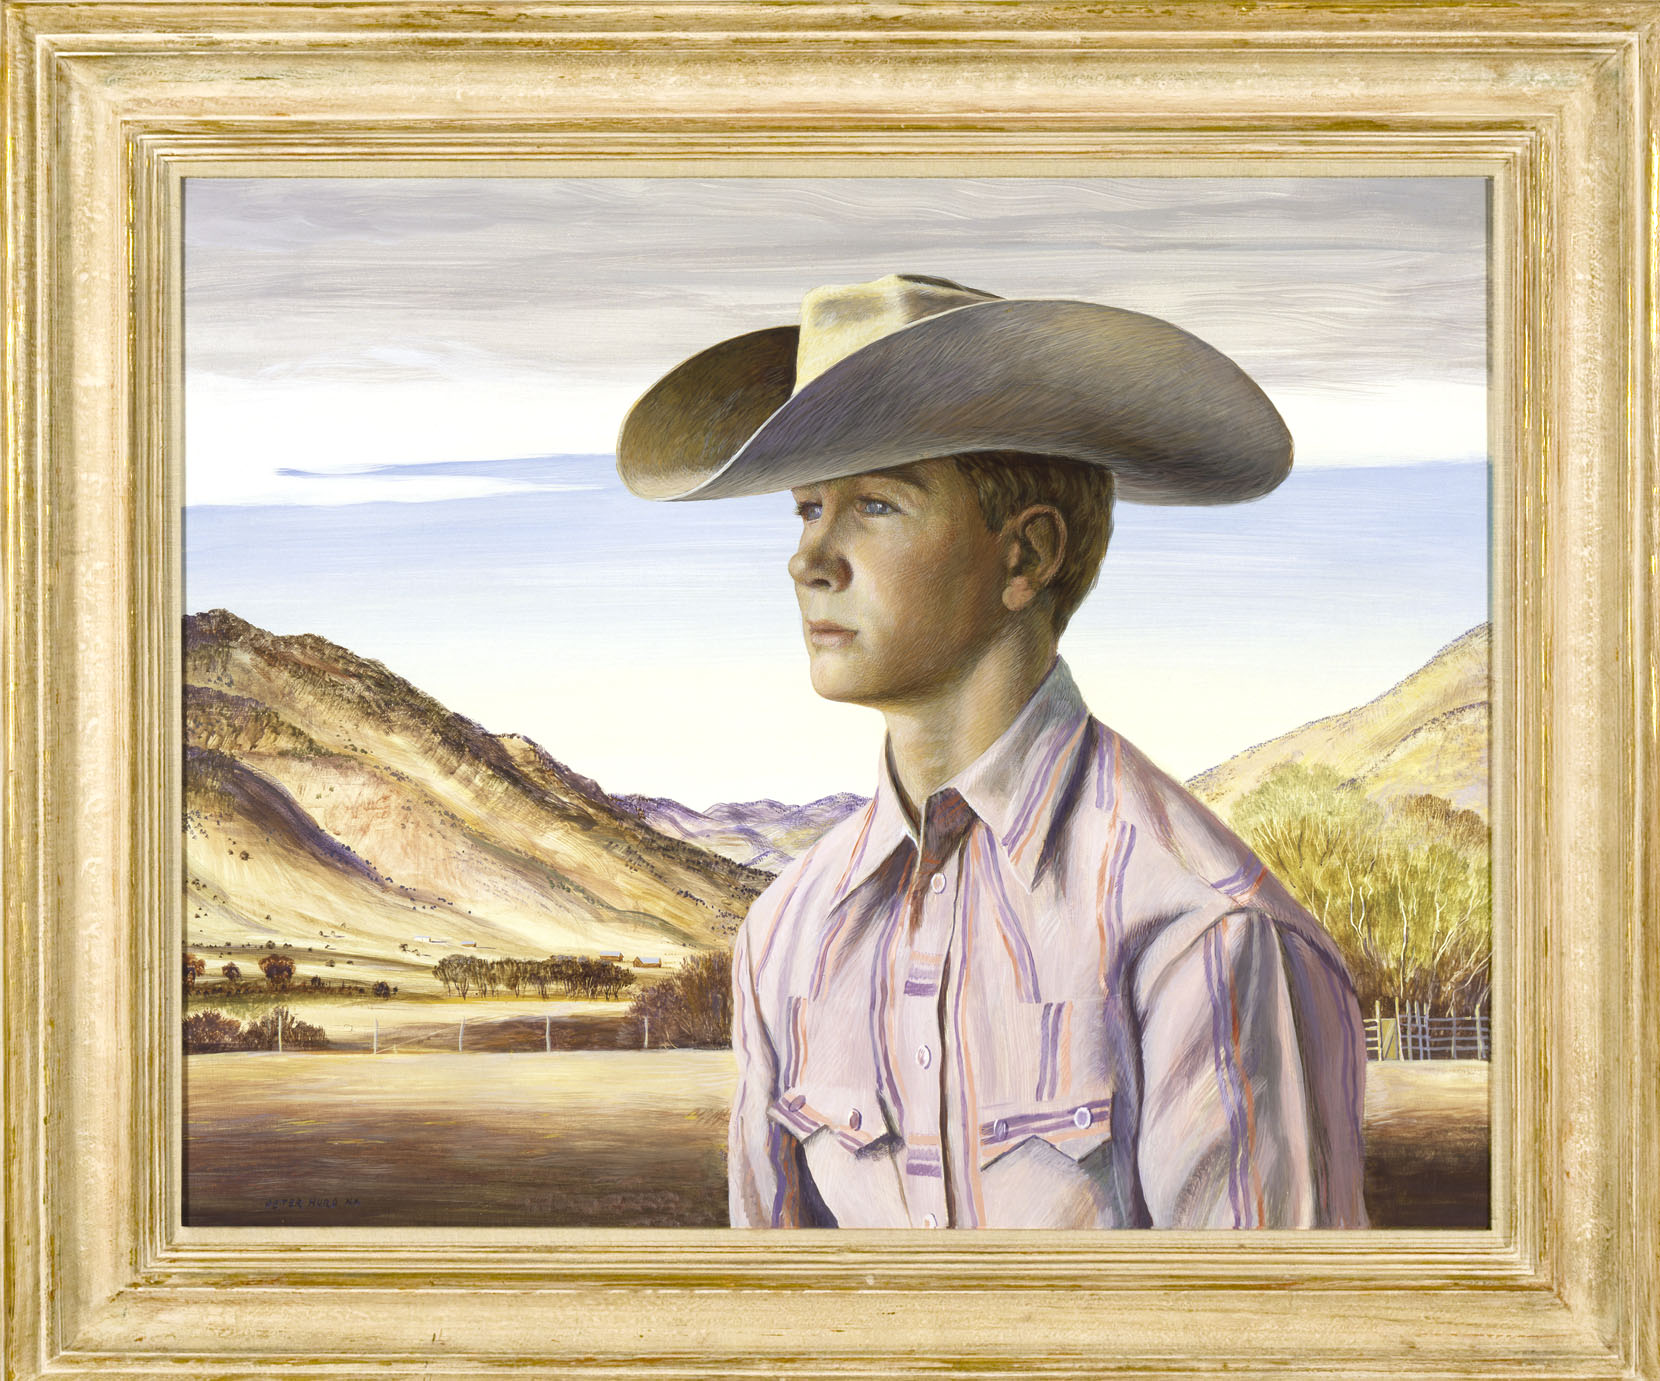 Young man in cowboy hat, purple shirt with orange stripes, mountains in background